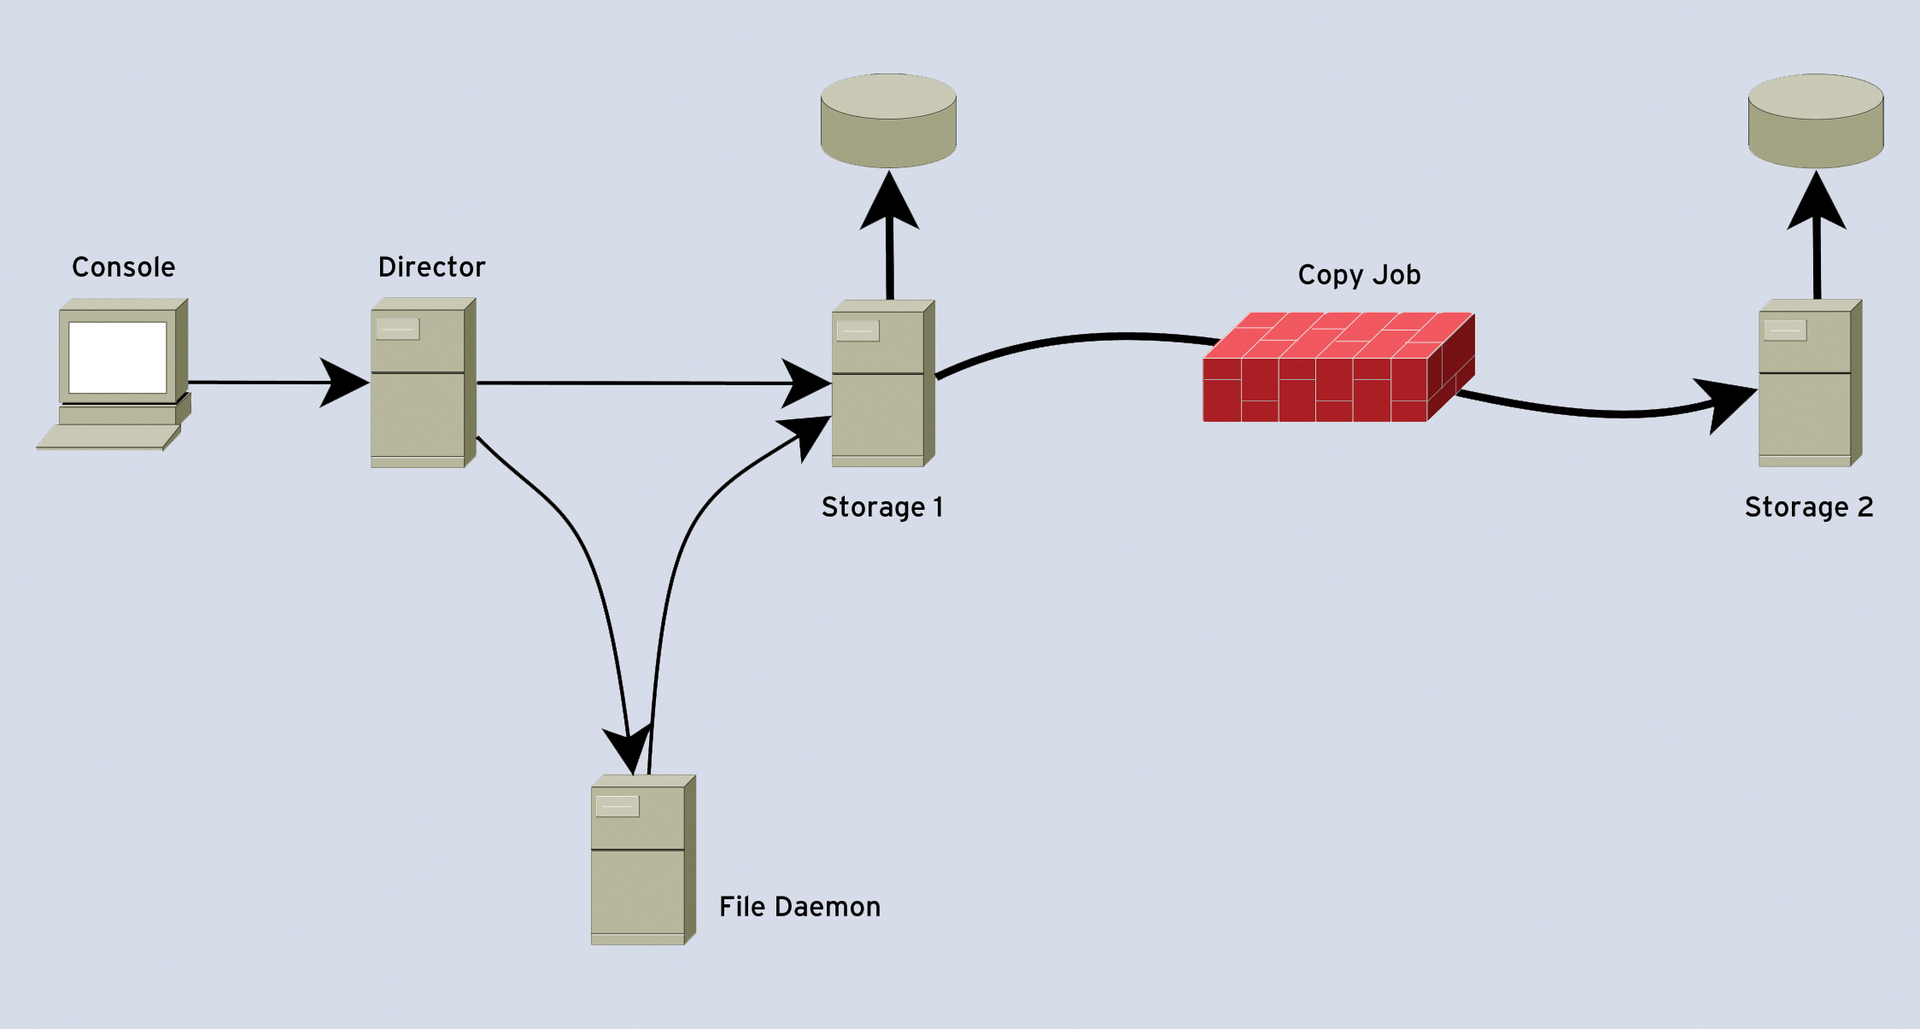 Now: Copying is possible between different Storage daemons across the network. 